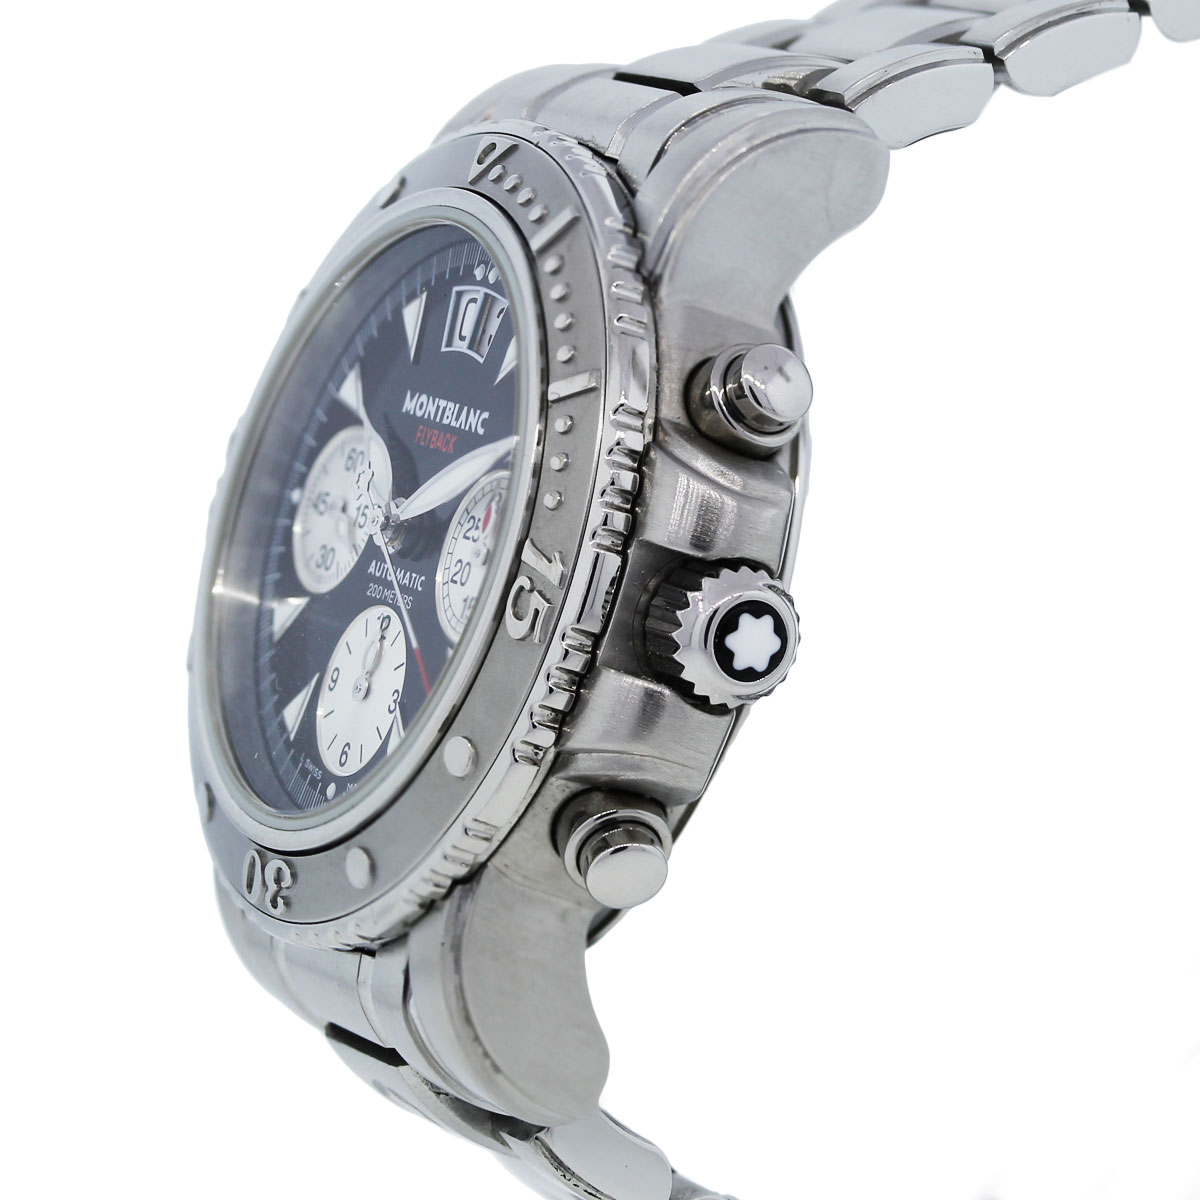 MontBlanc 7059 Stainless Steel Chronograph Watch